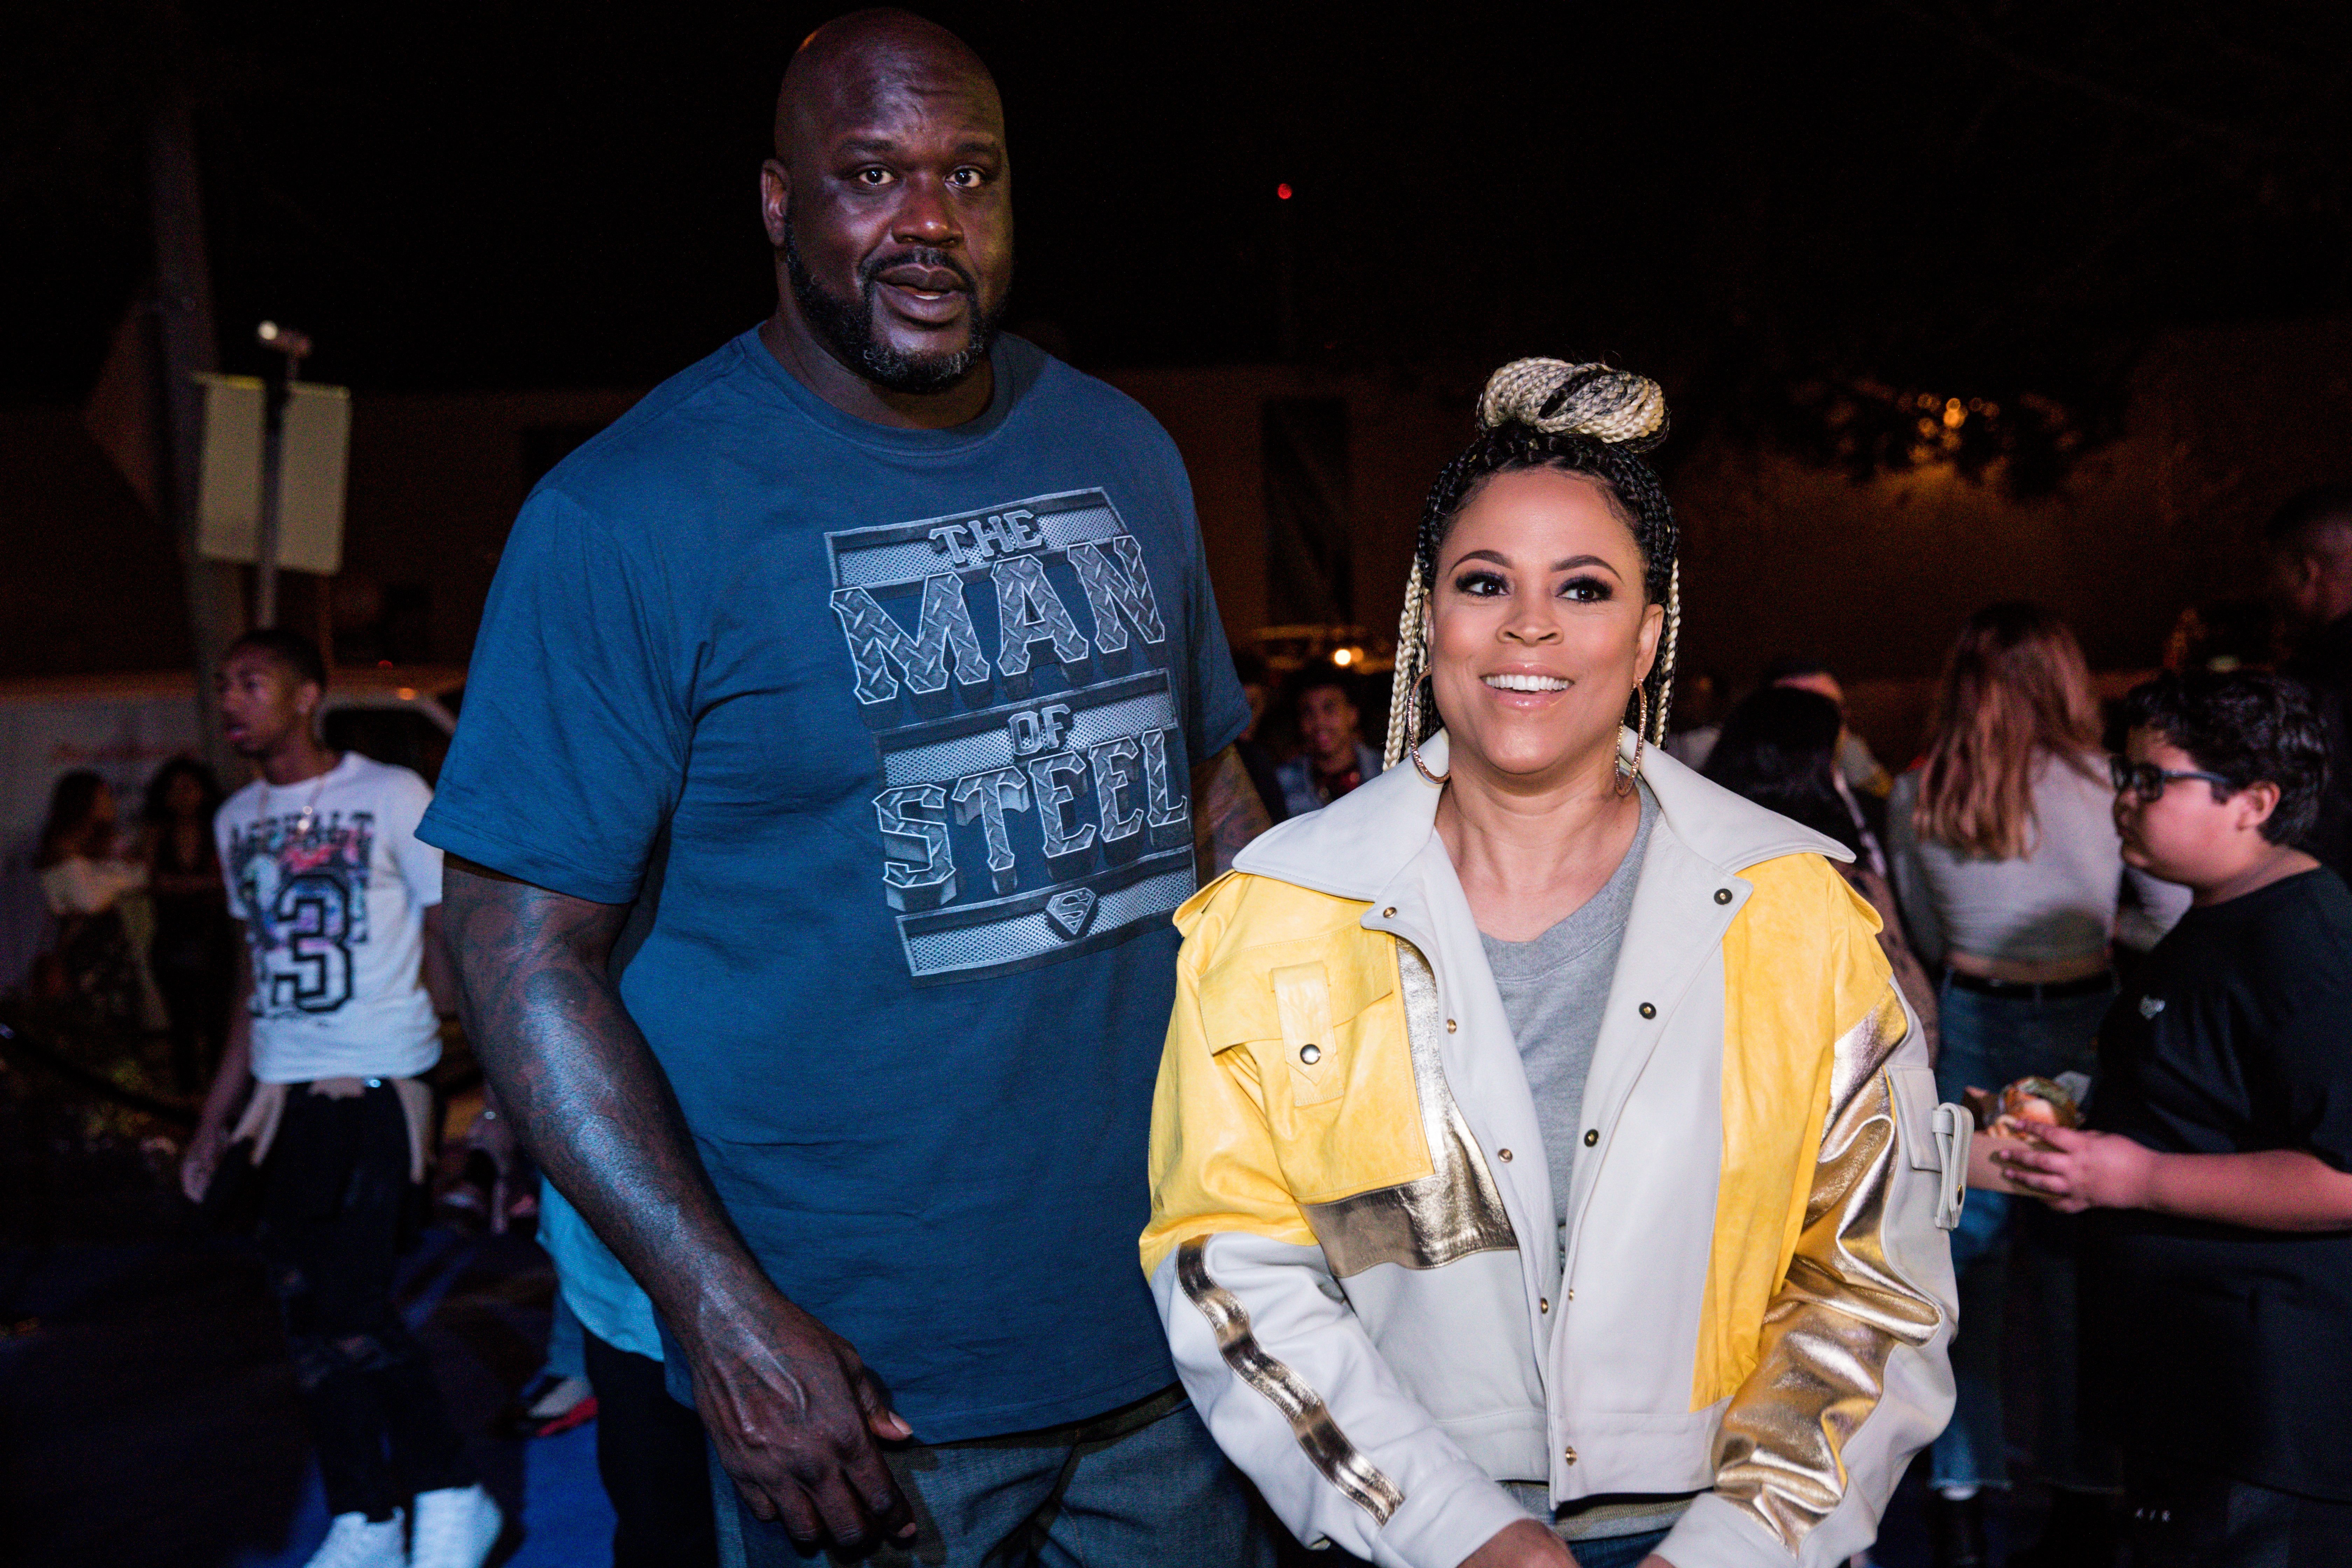 Shaunie O'Neal and Shaquille O'Neal celebrate Shareef O'Neal's 18th birthday party. Jan. 13, 2018. | Photo: GettyImages